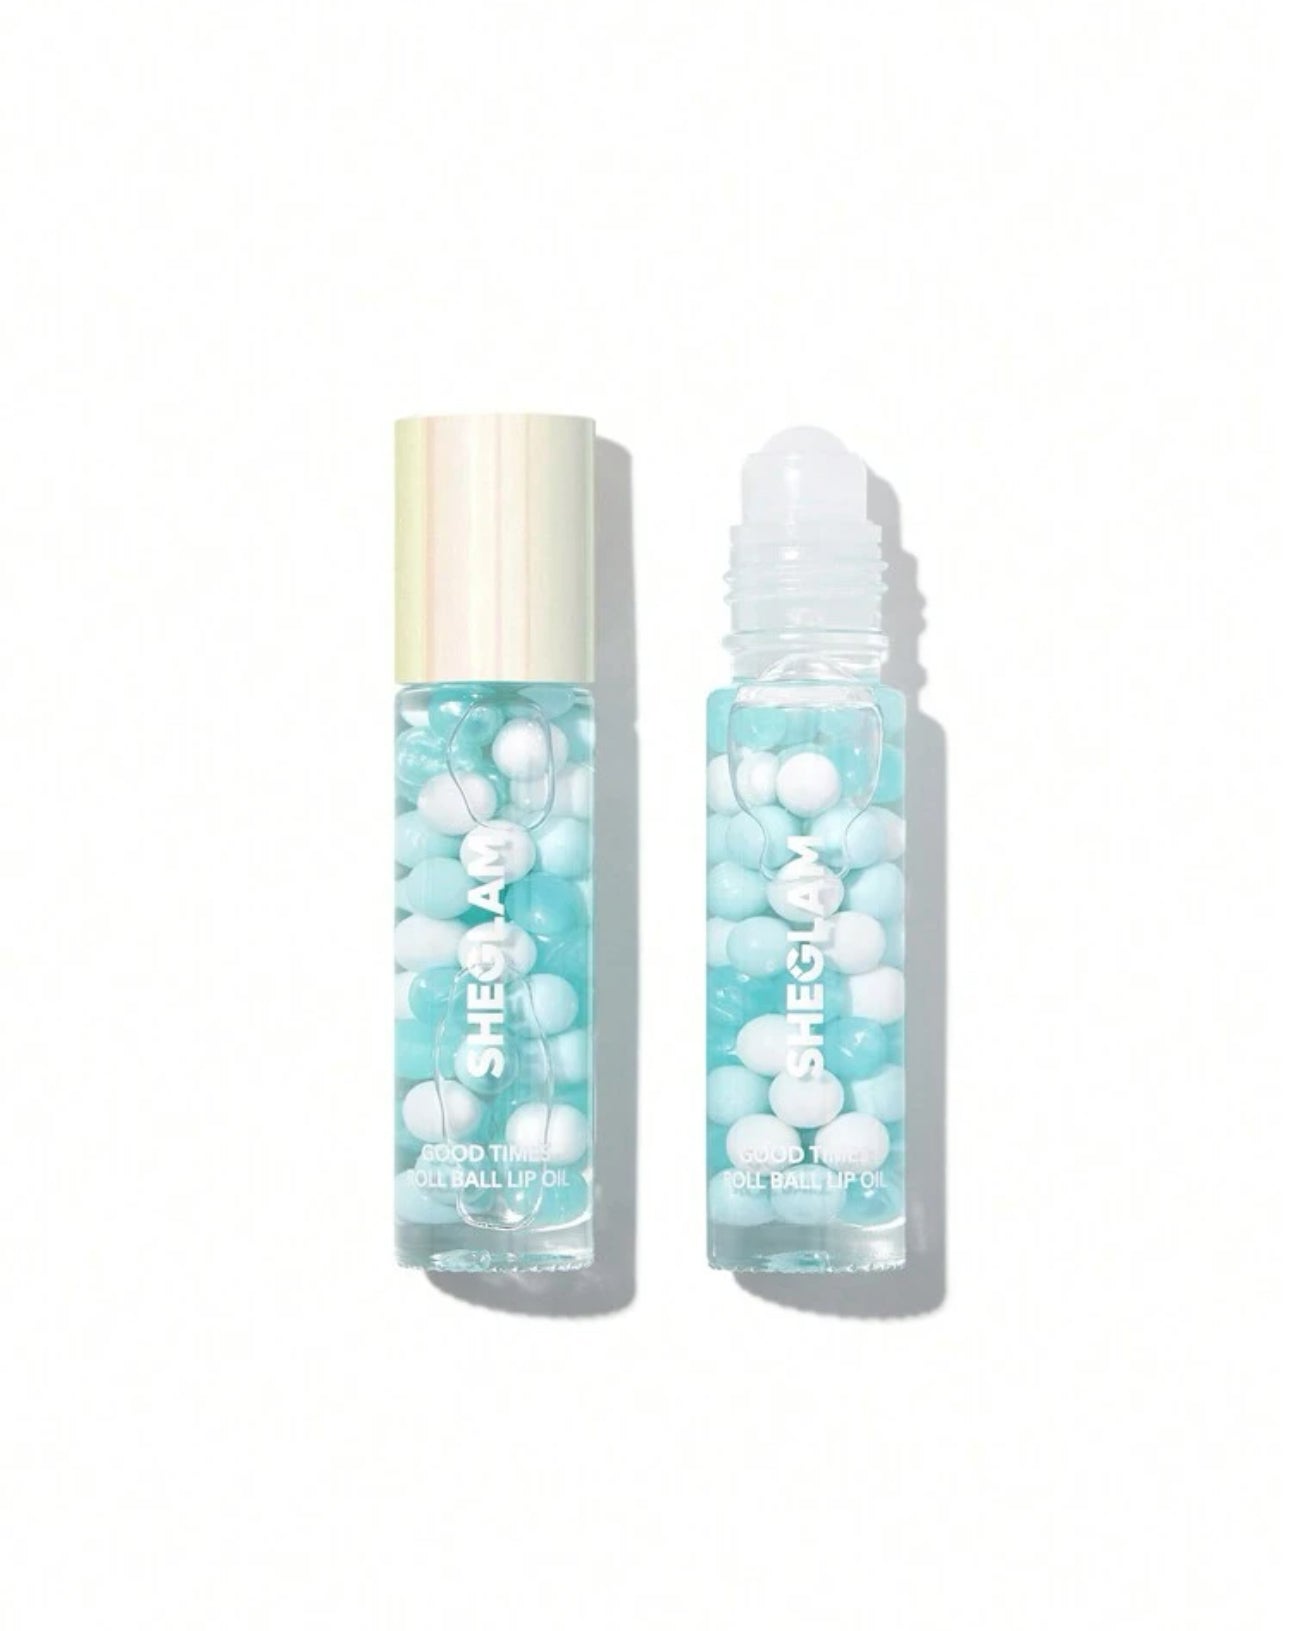 SHEGLAM Good Times Roll Ball Lip Oil-Have a Ball Clear Plumping Lip Care